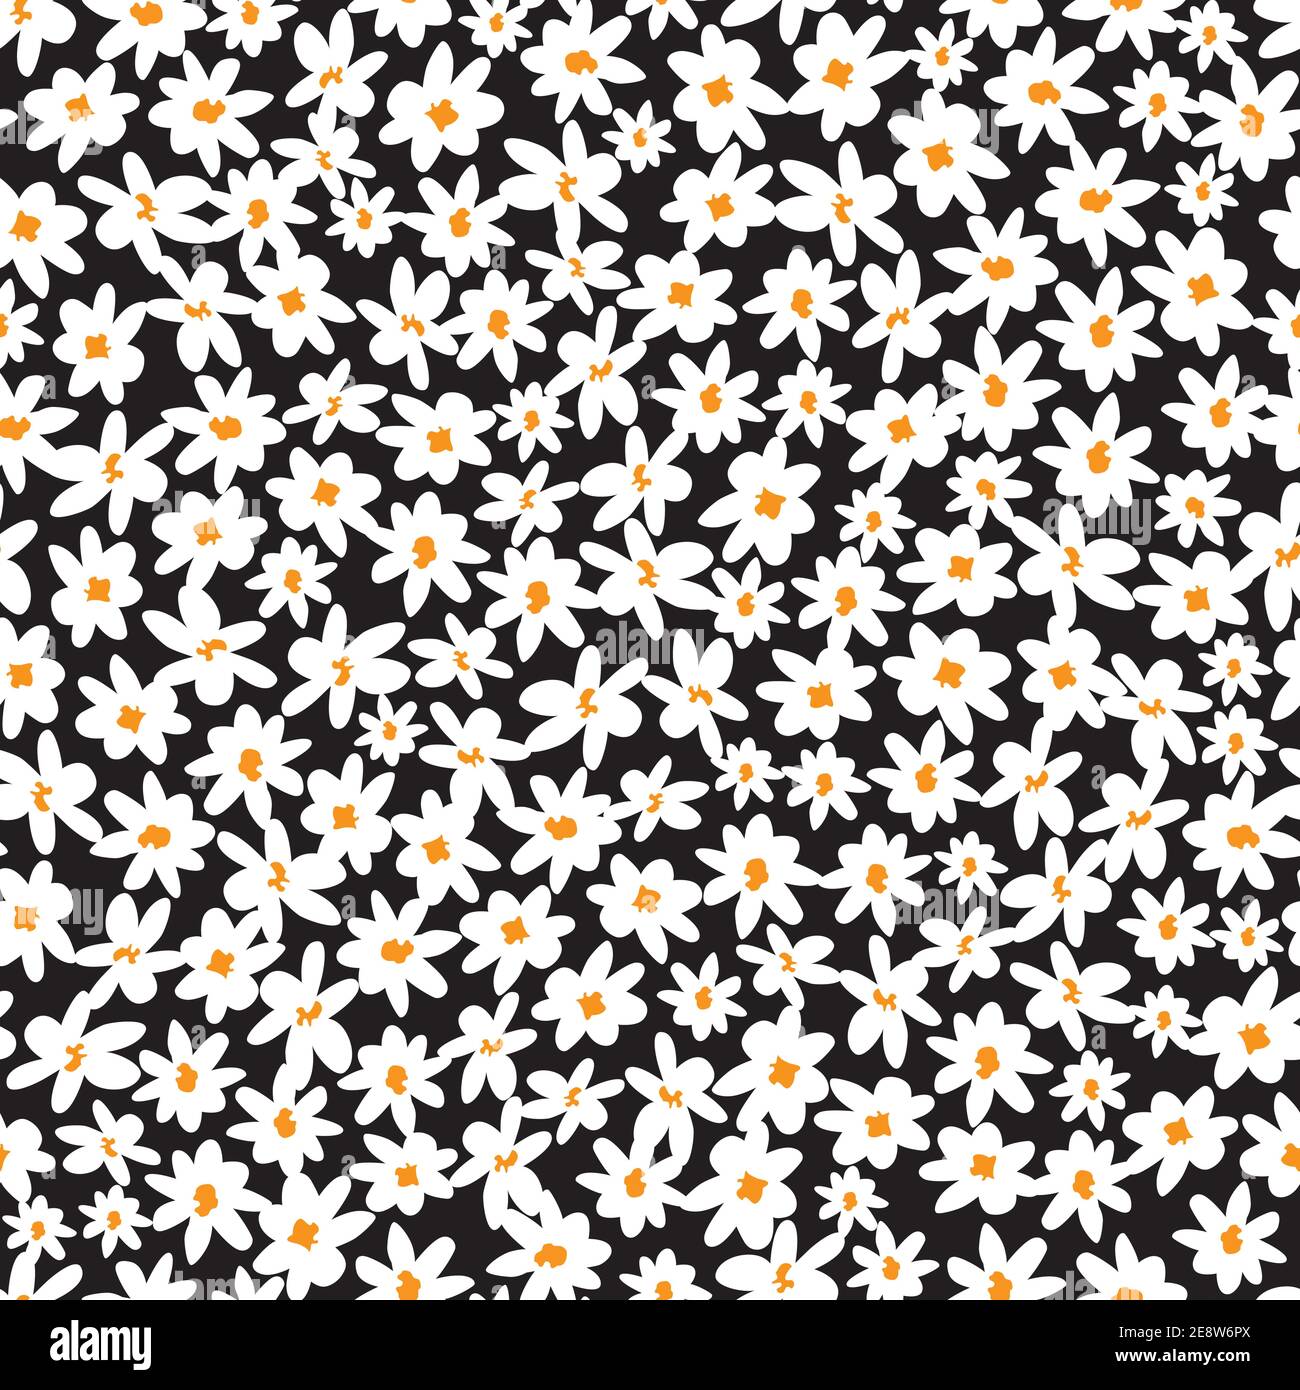 Vector black and white scattered fun daisy flowers repeat pattern with orange center. Suitable for textile, gift wrap and wallpaper. Stock Vector